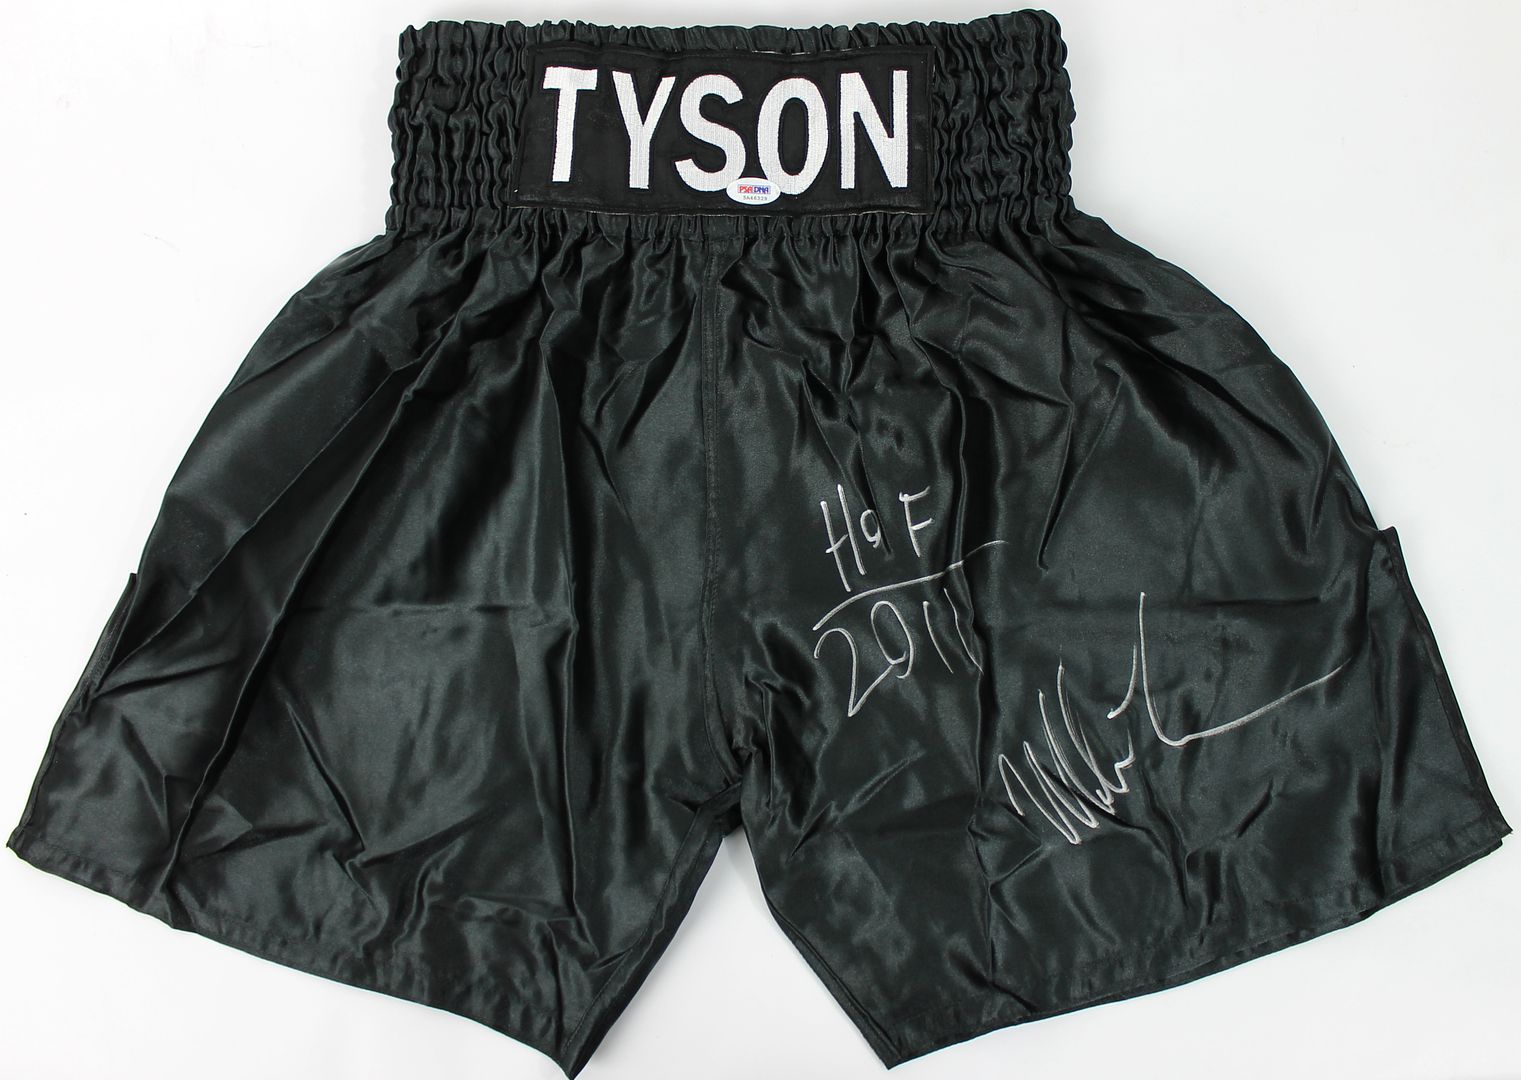 Mike Tyson "HOF 2011" Authentic Signed Boxing Trunks Autographed PSA DNA ITP